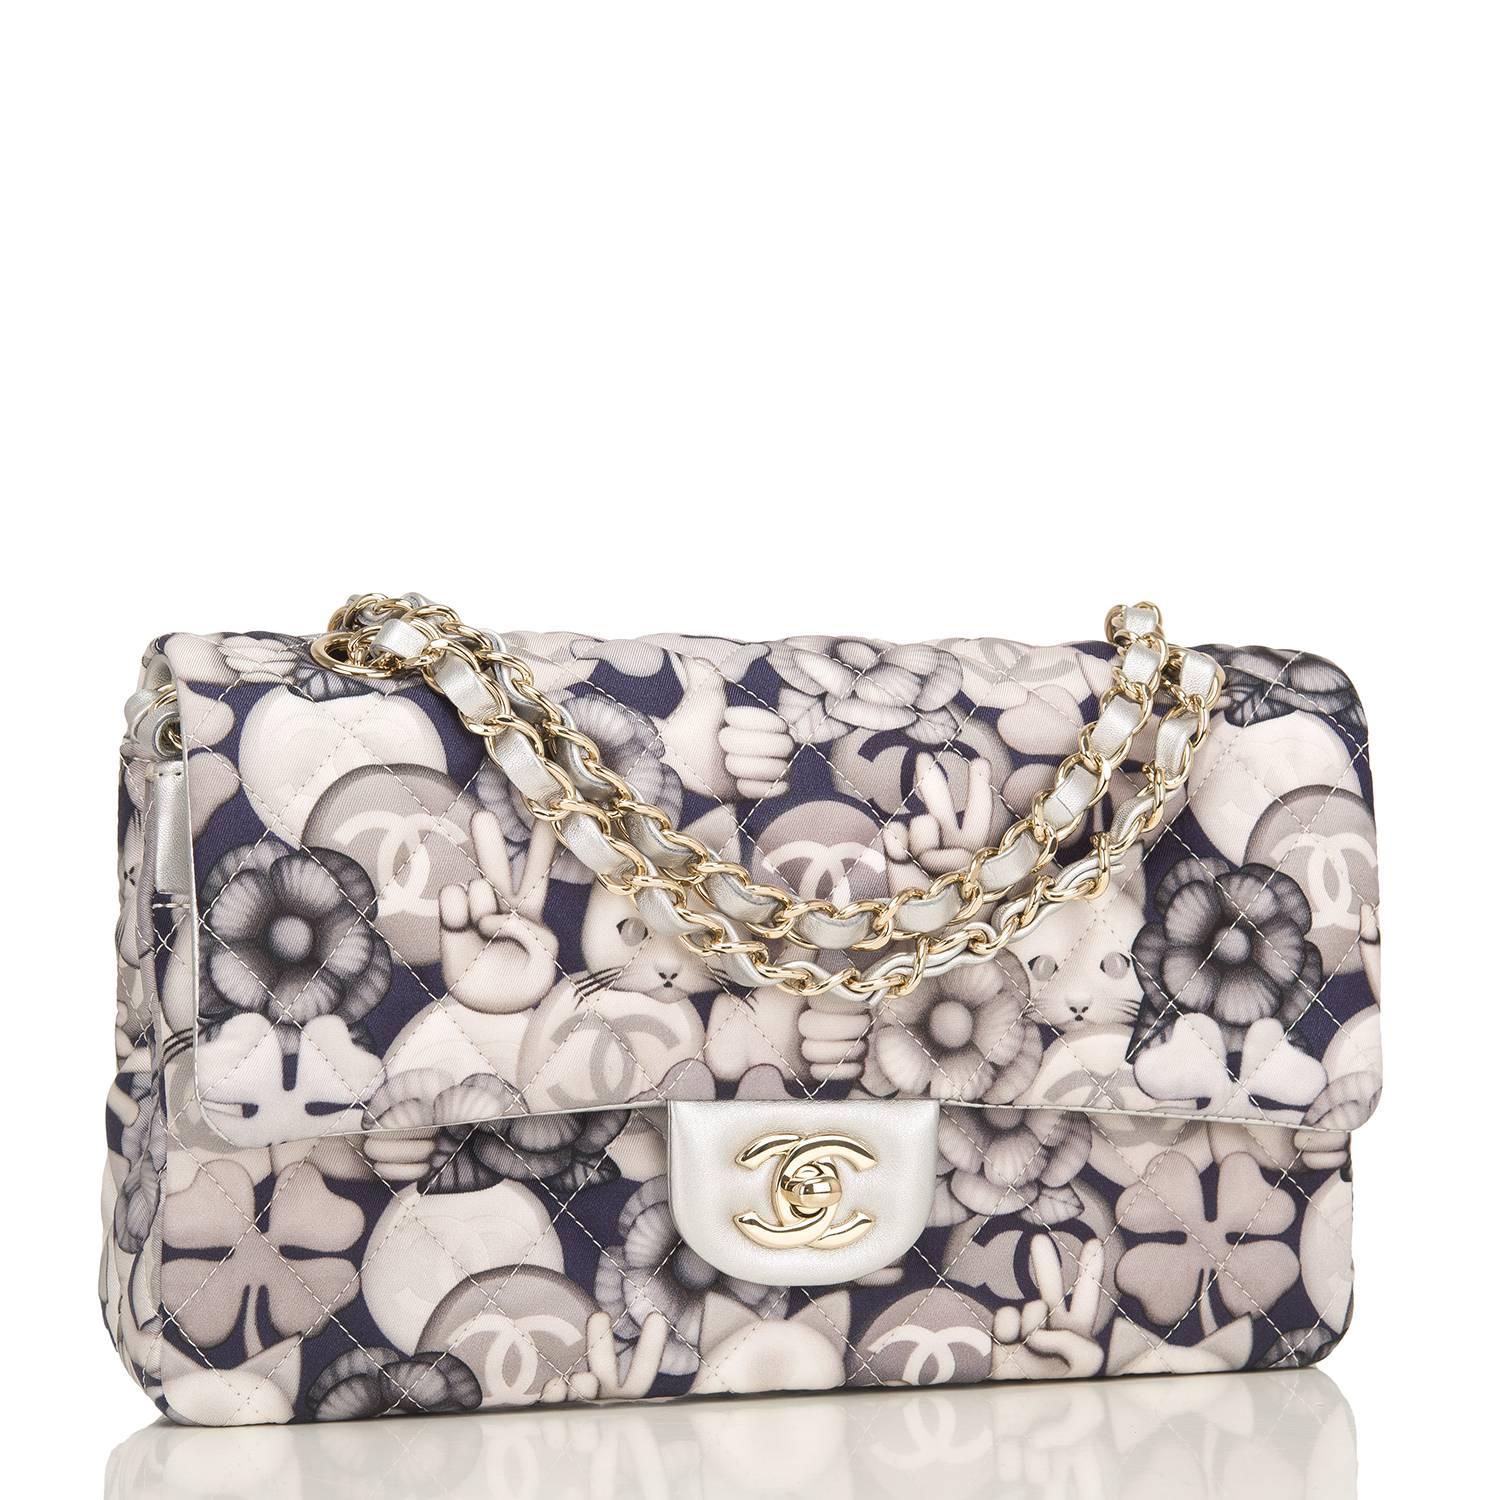 Chanel CC, Peace, Cat graphic printed quilted fabric and leather Classic Medium double flap bag of grey, navy and silver with silver leather and gold tone hardware.

This runway bag has a printed design of cats, camellias, CCs, peace signs, and